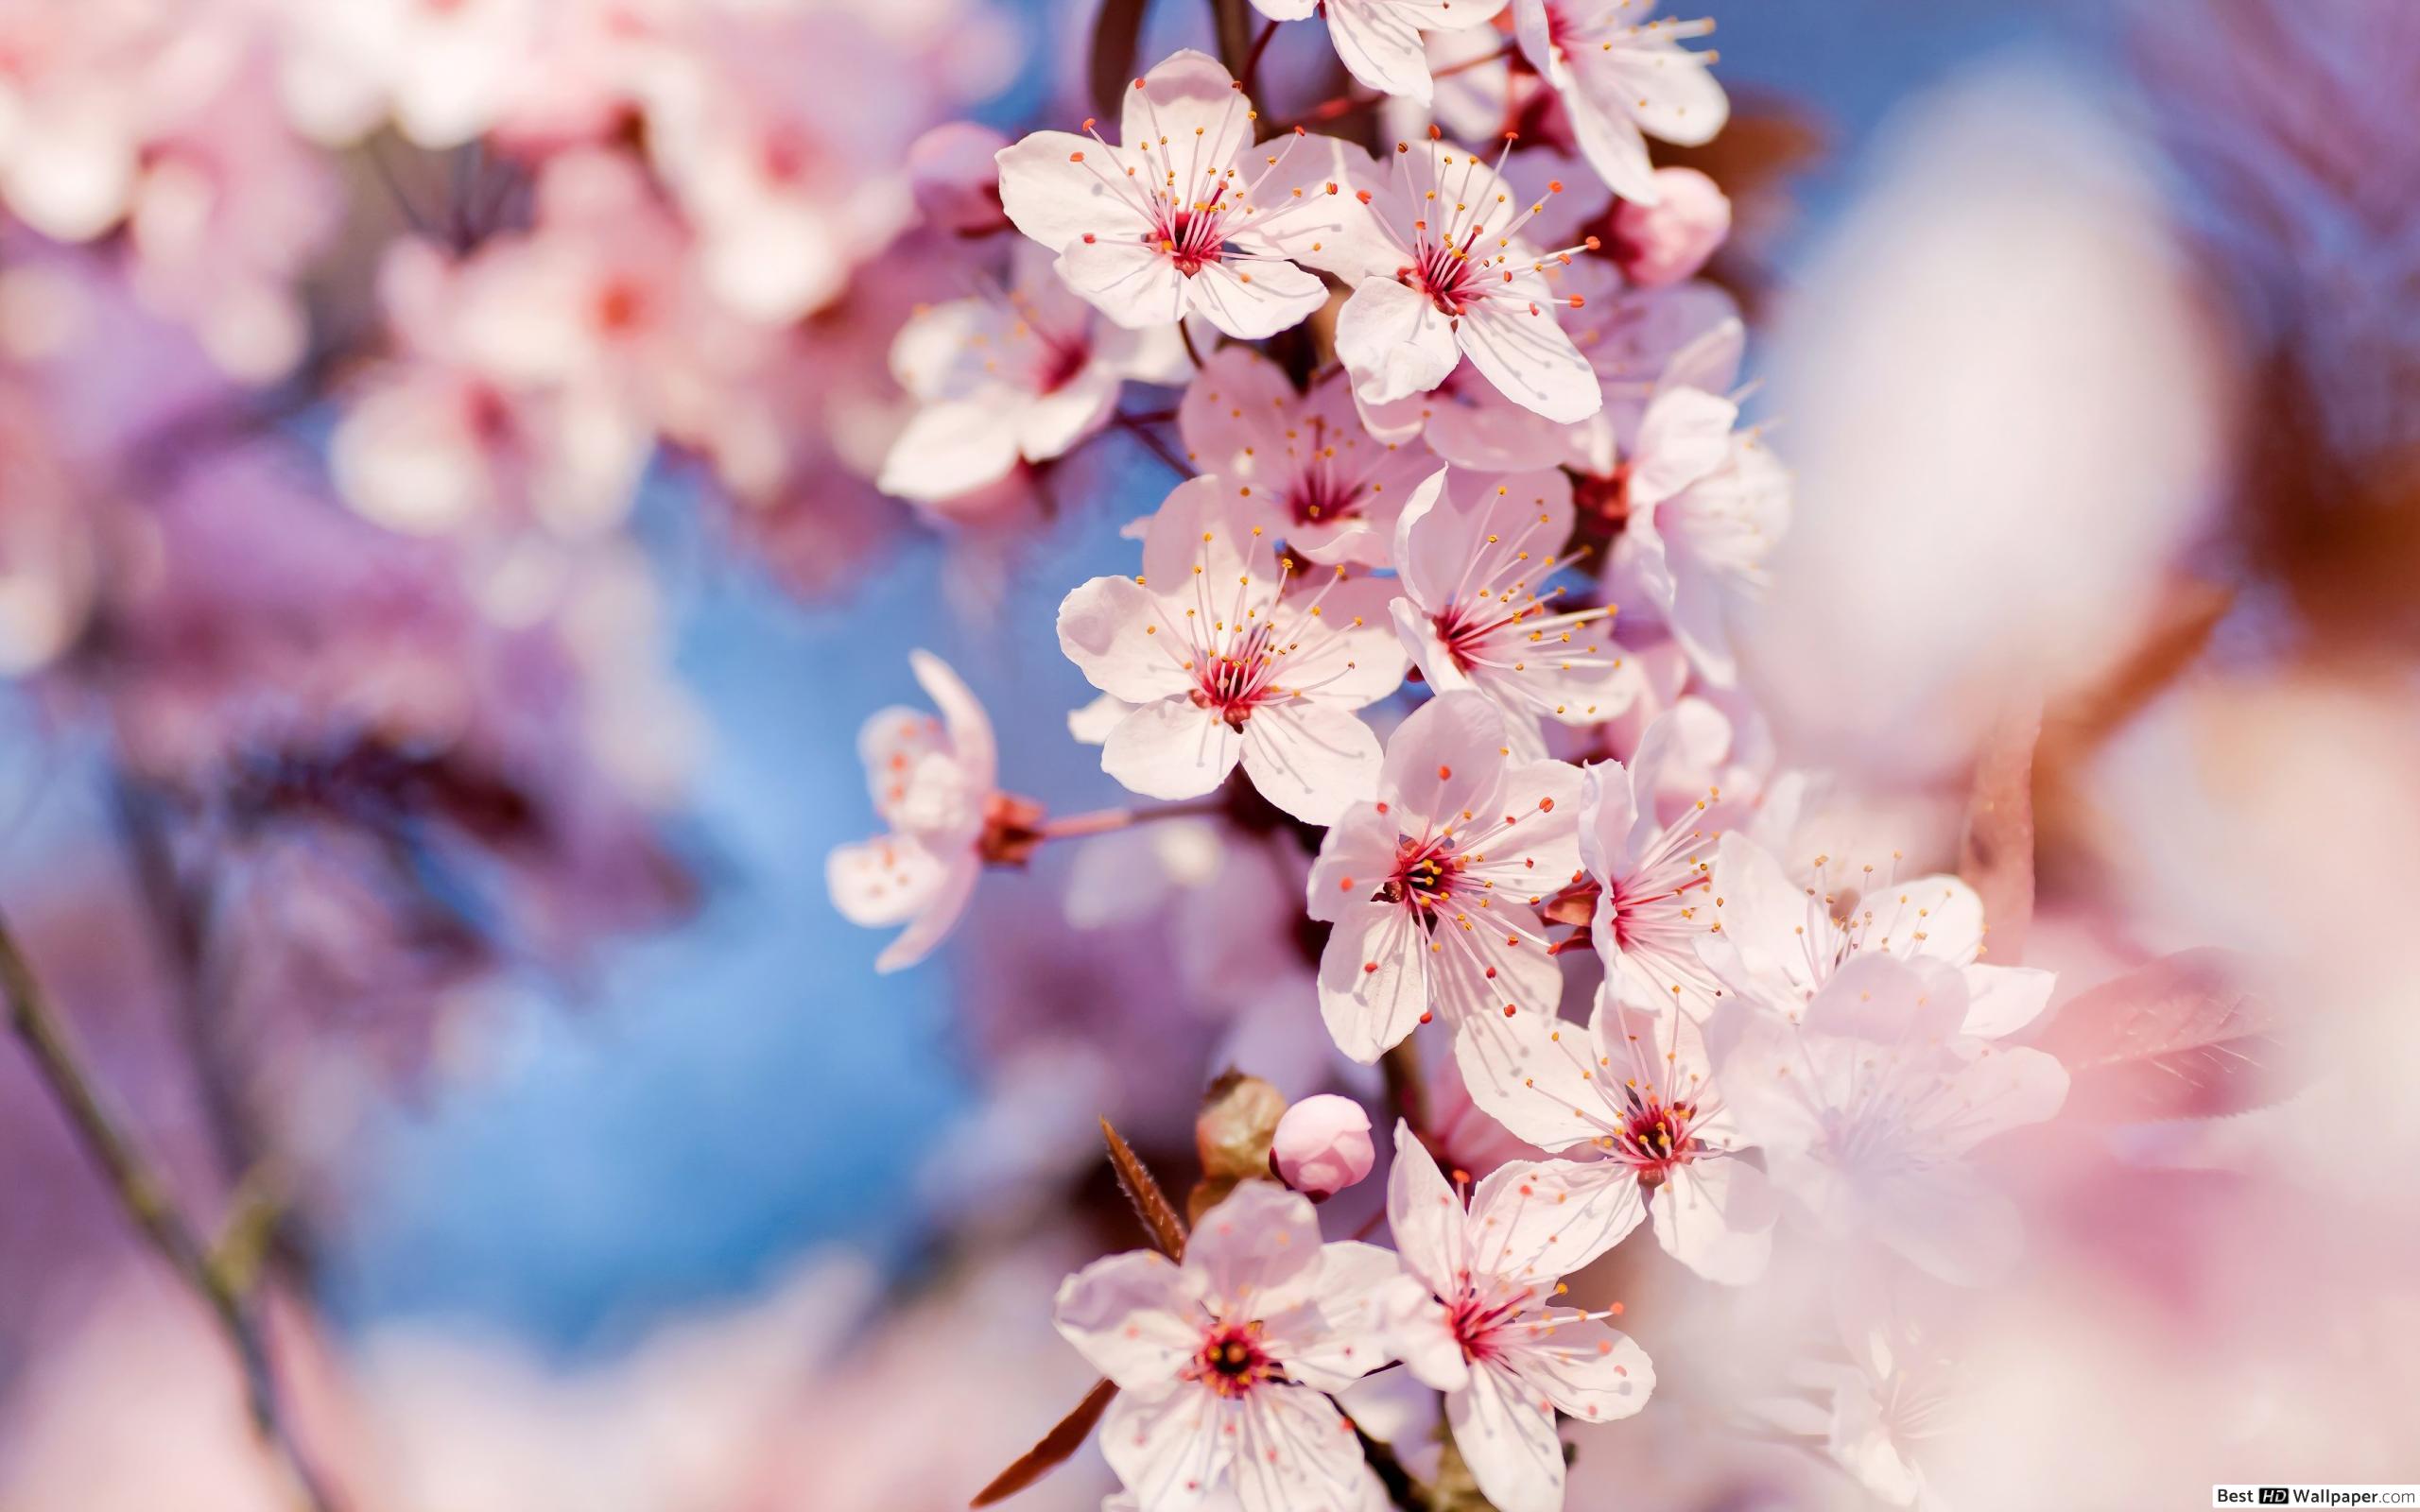 4K Cherry Blossom Wallpaper - KoLPaPer - Awesome Free HD Wallpapers